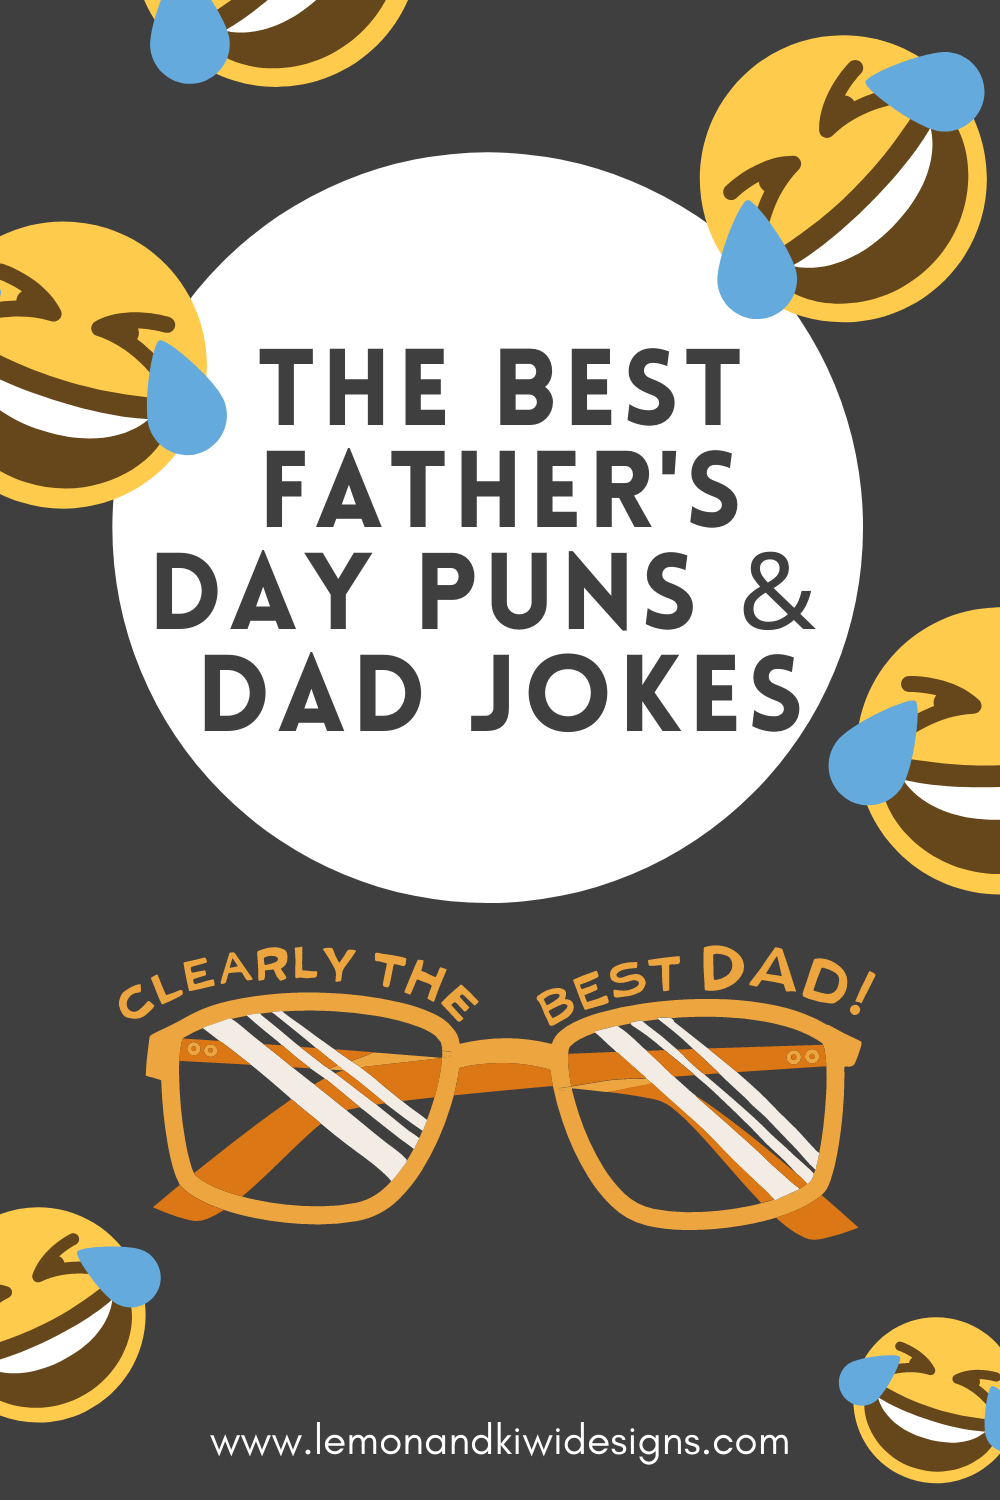 45 Hilarious Dad Jokes for Father’s Day